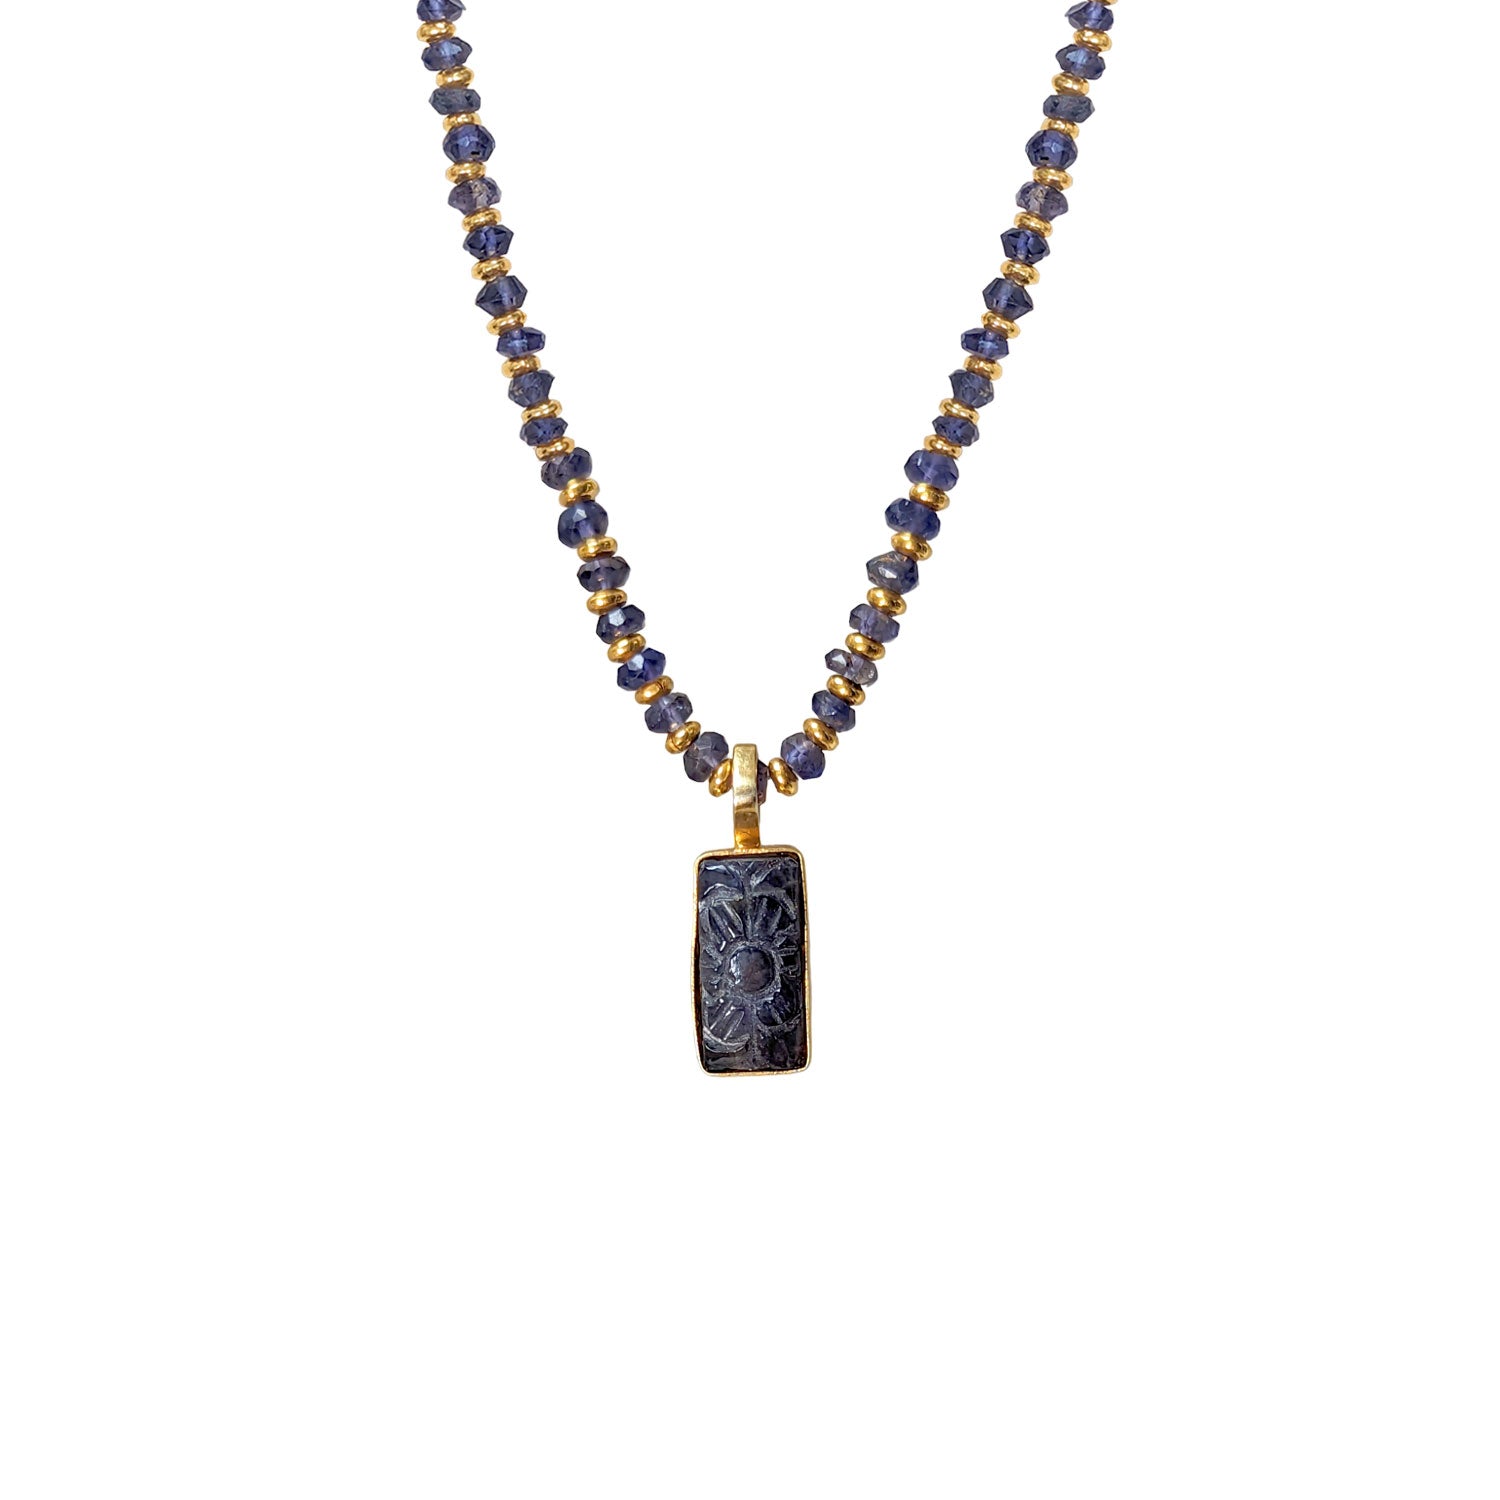 Carved Iolite pendant in Vermeil on Iolite Chain